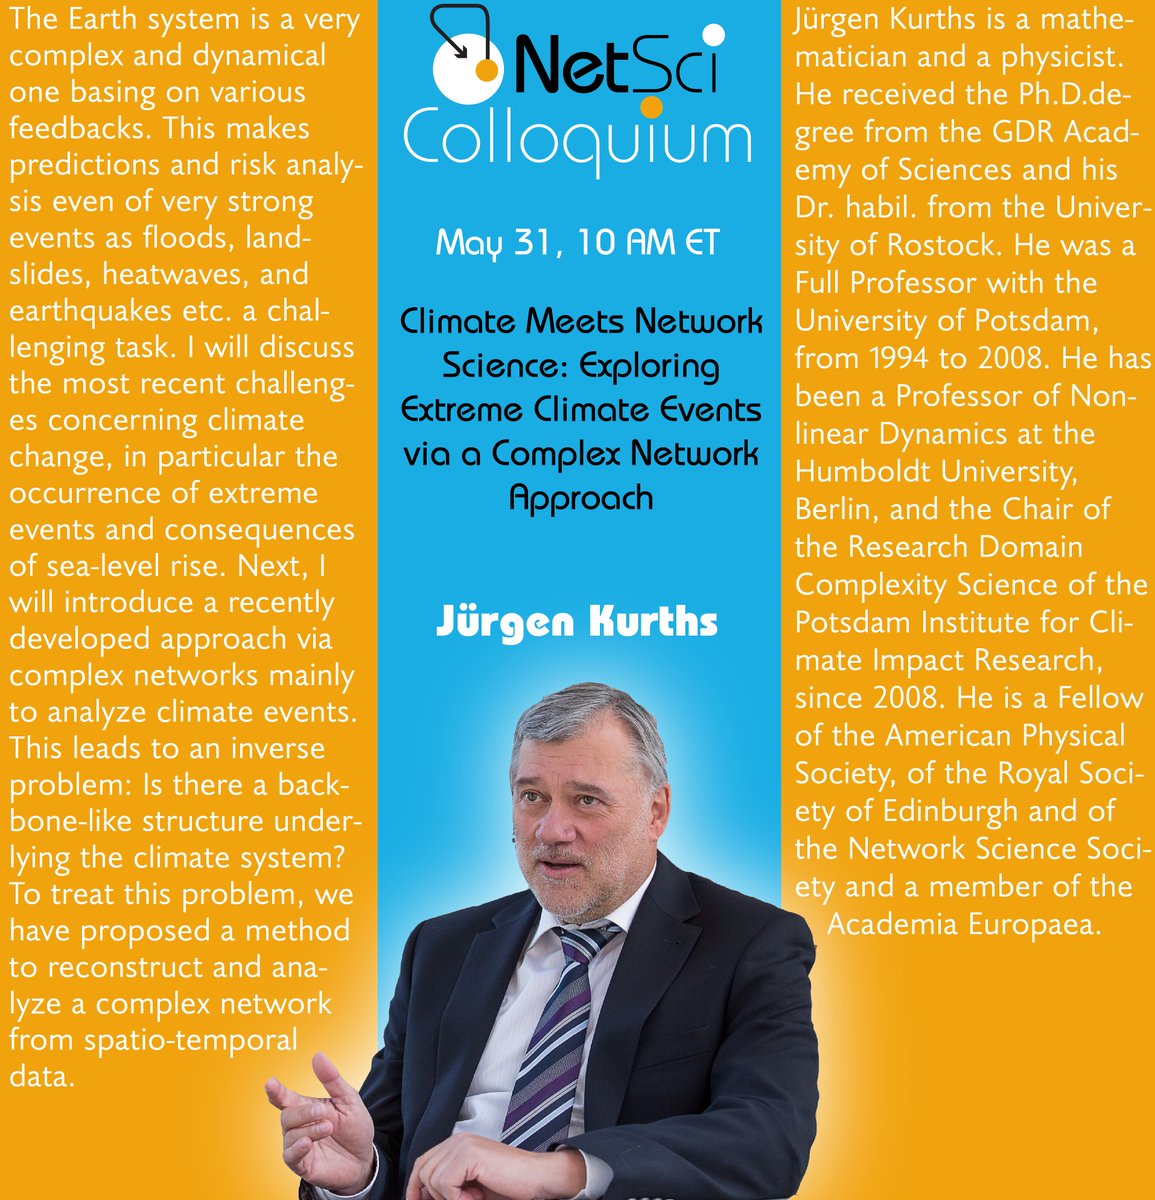 Not to be missed! The final colloquium speaker of the season is living legend Jürgen Kurths. Register here iu.zoom.us/webinar/regist… and tune in on May 31.